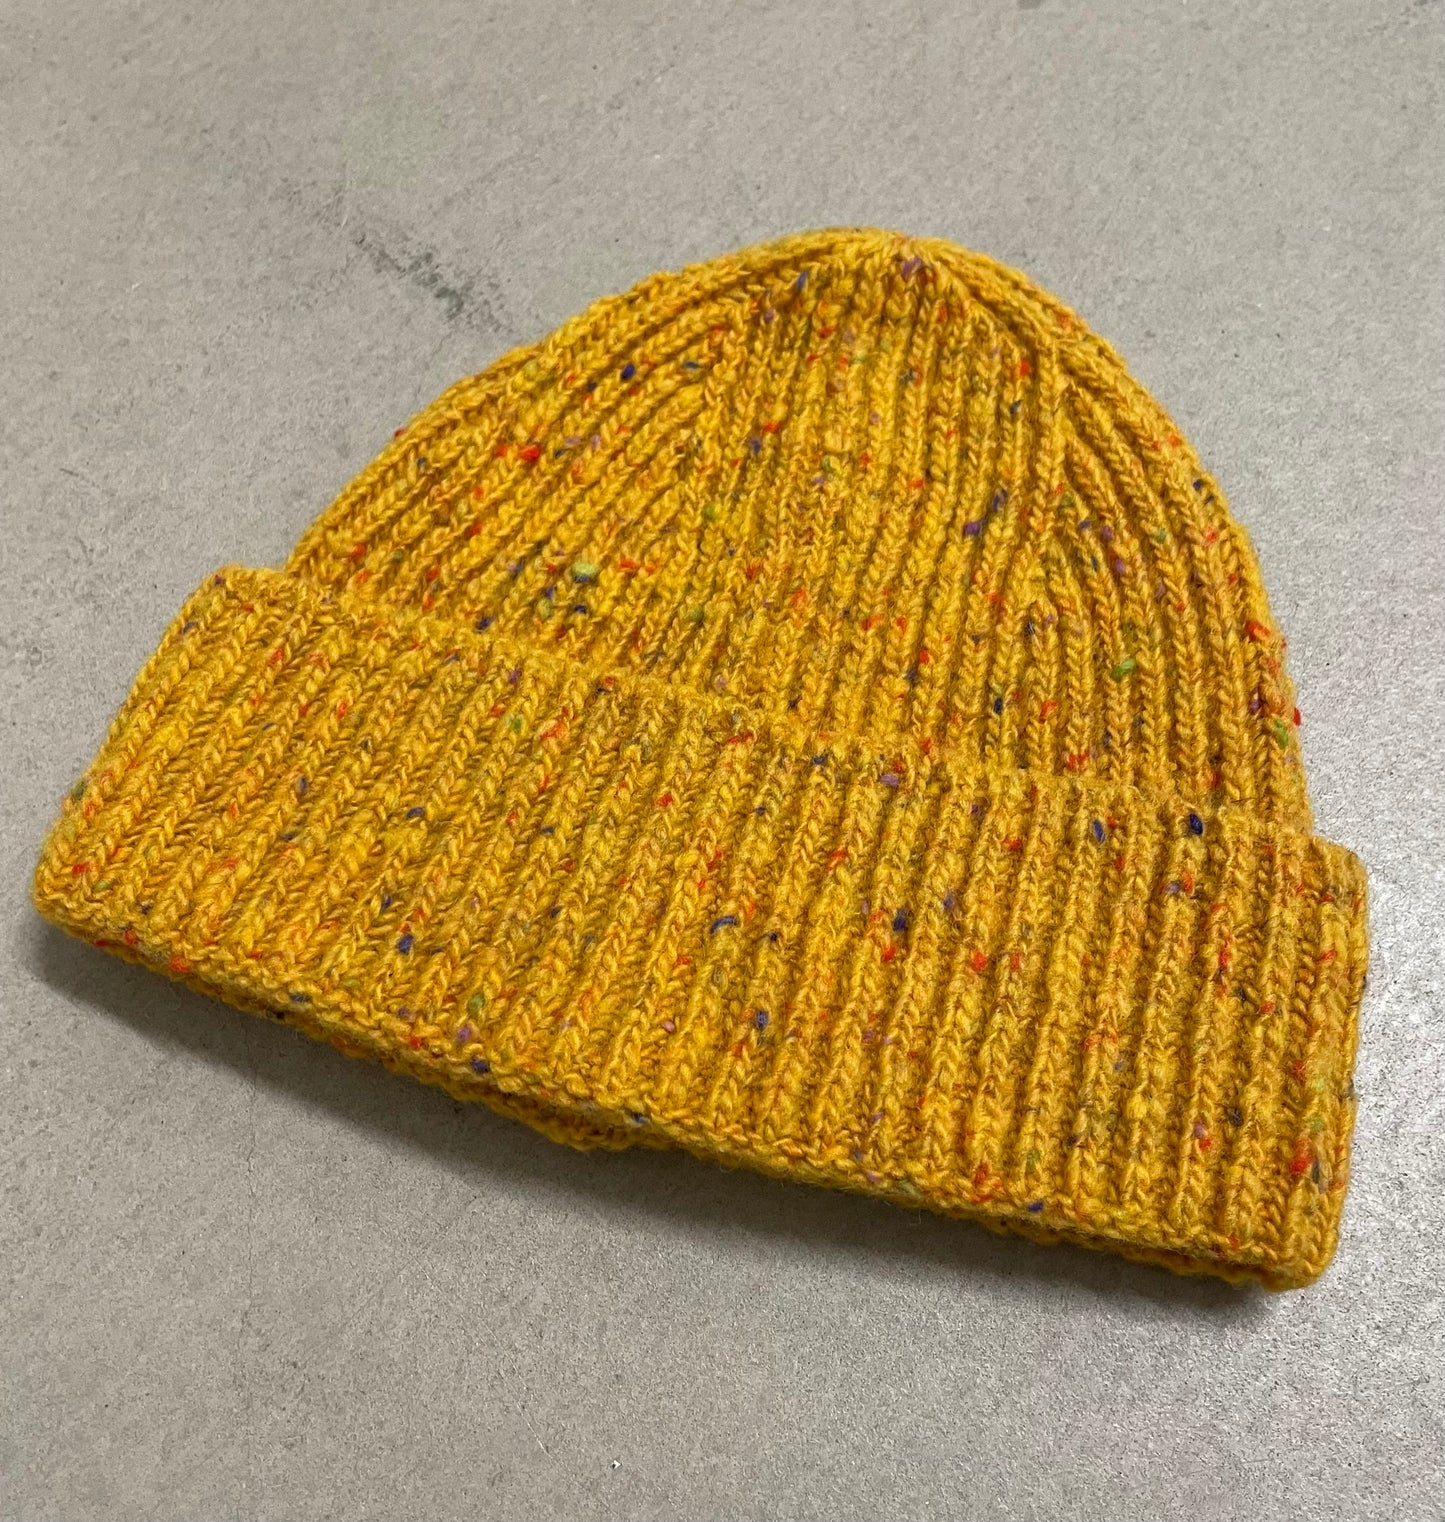 Donegal Beanie - Yellow